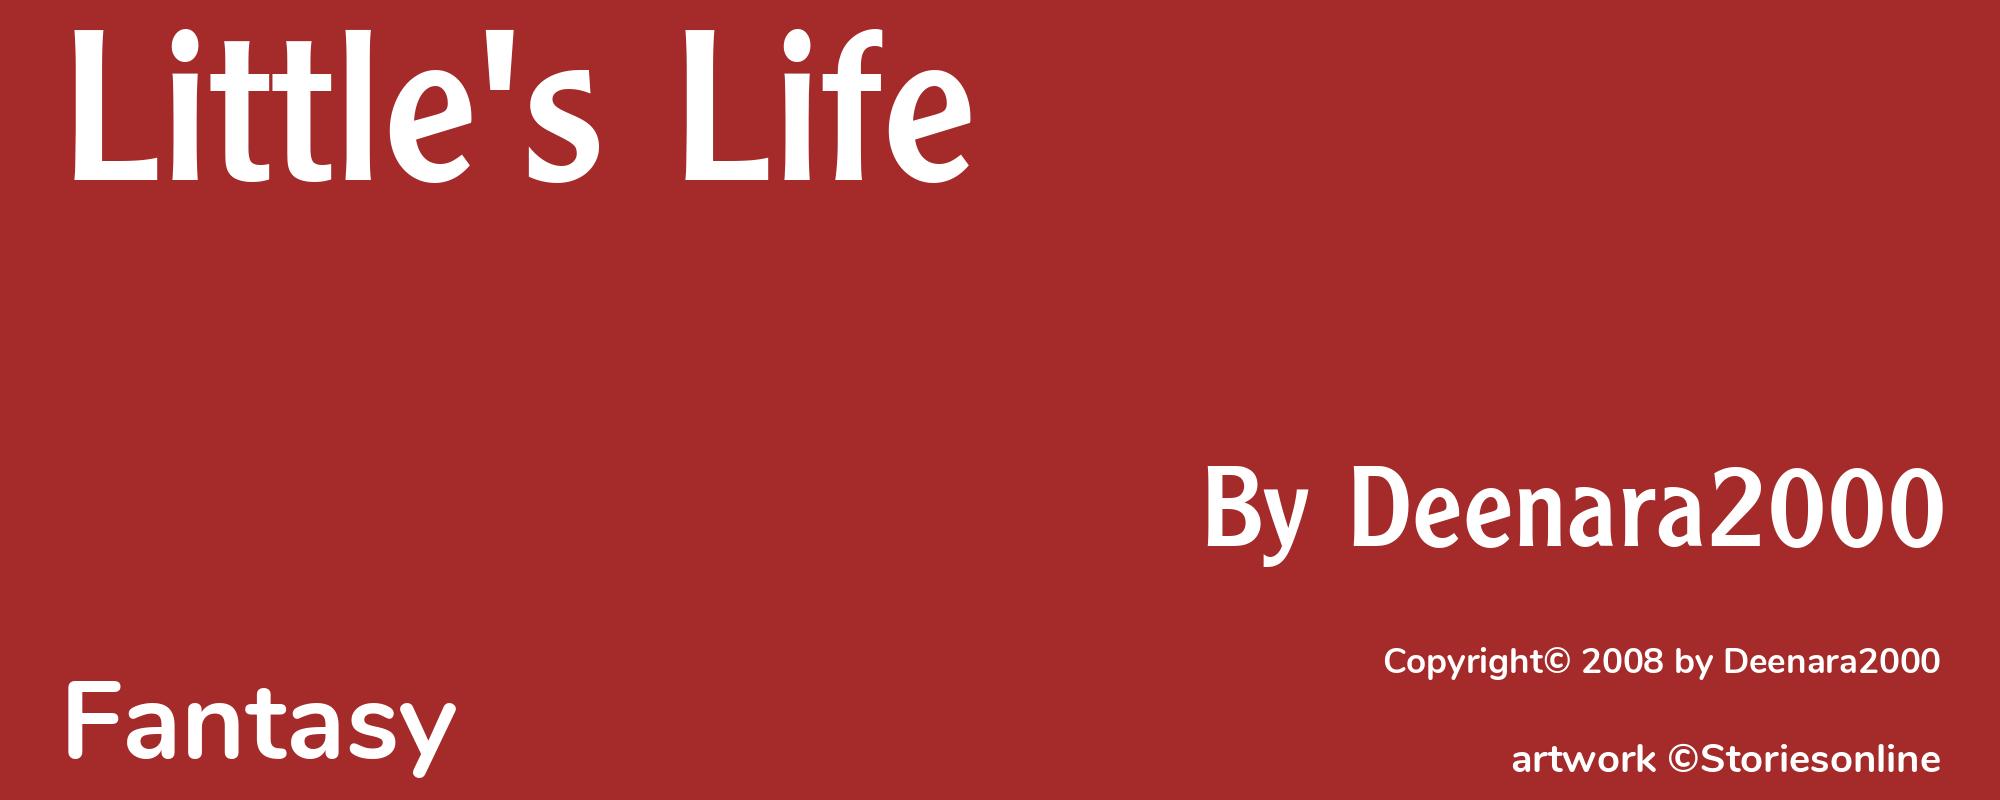 Little's Life - Cover